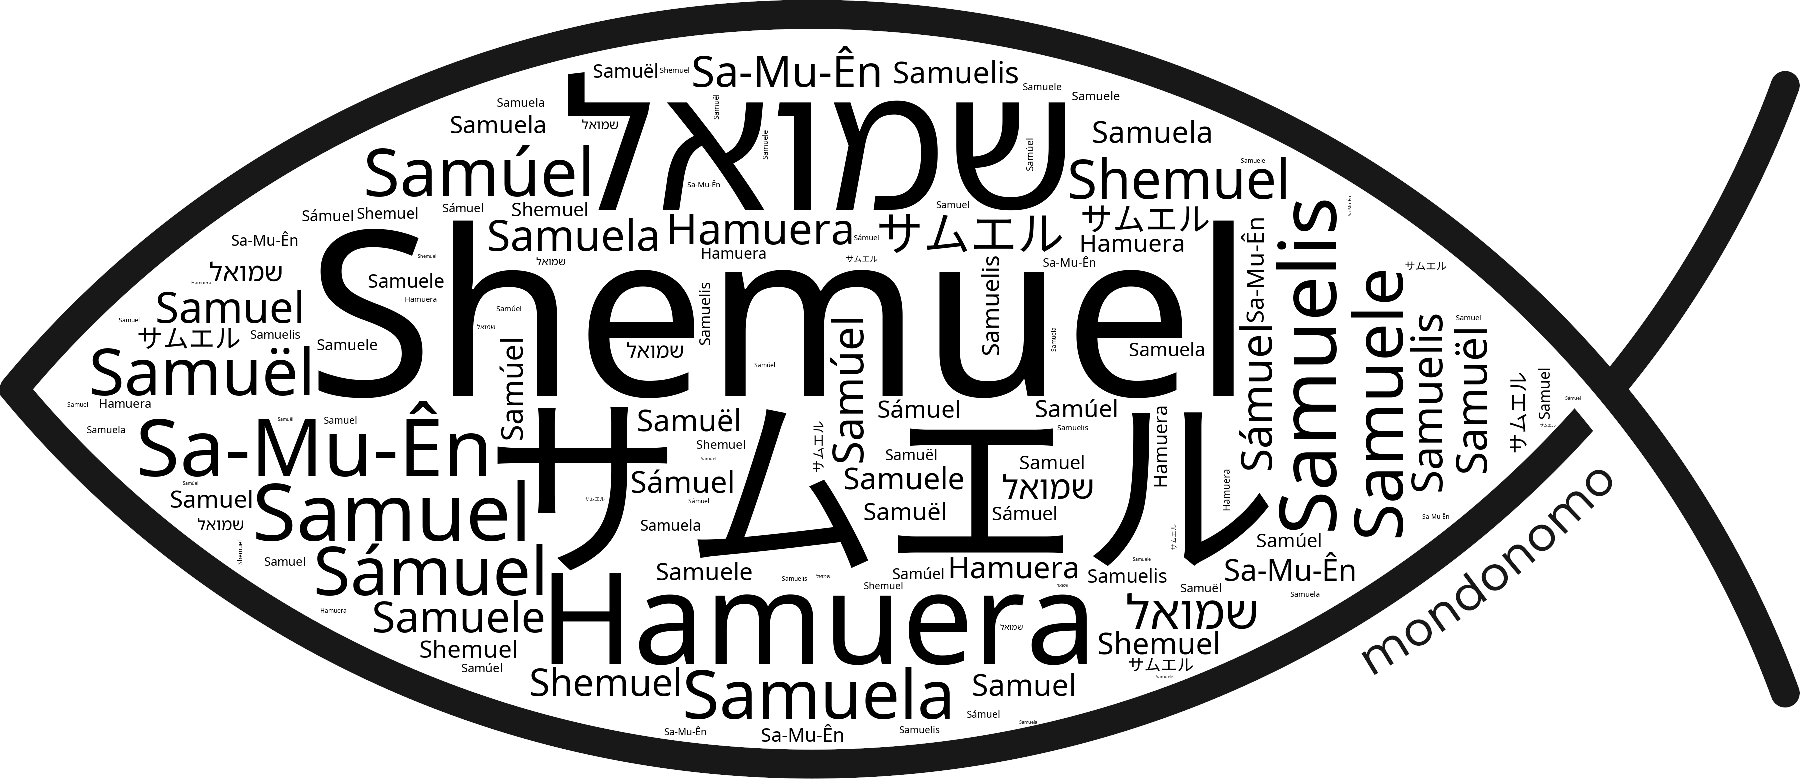 Name Shemuel in the world's Bibles